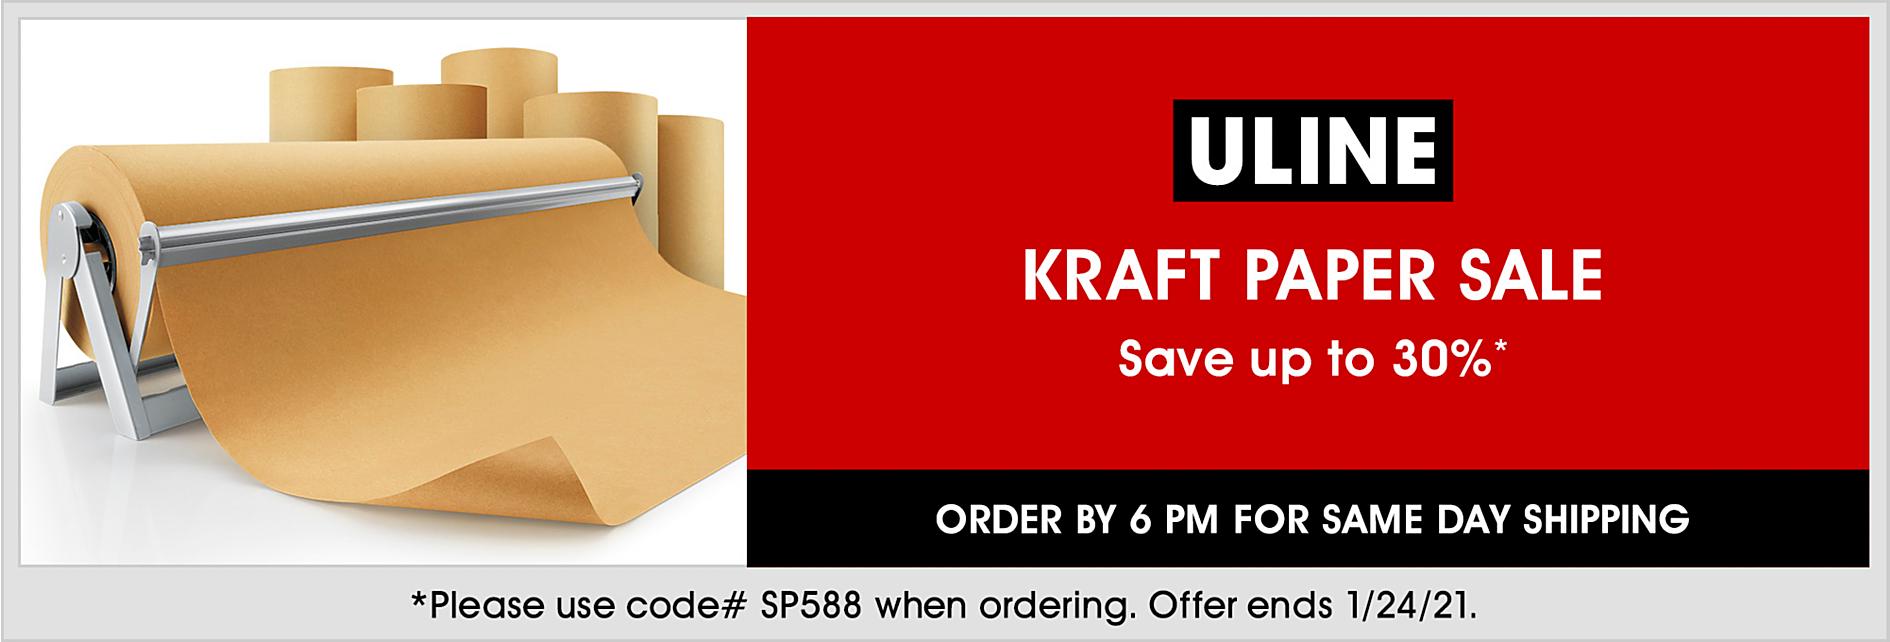 SP588 Kraft Paper Sale, Save up to 30%, Use code SP588, Offer ends 1/24/21